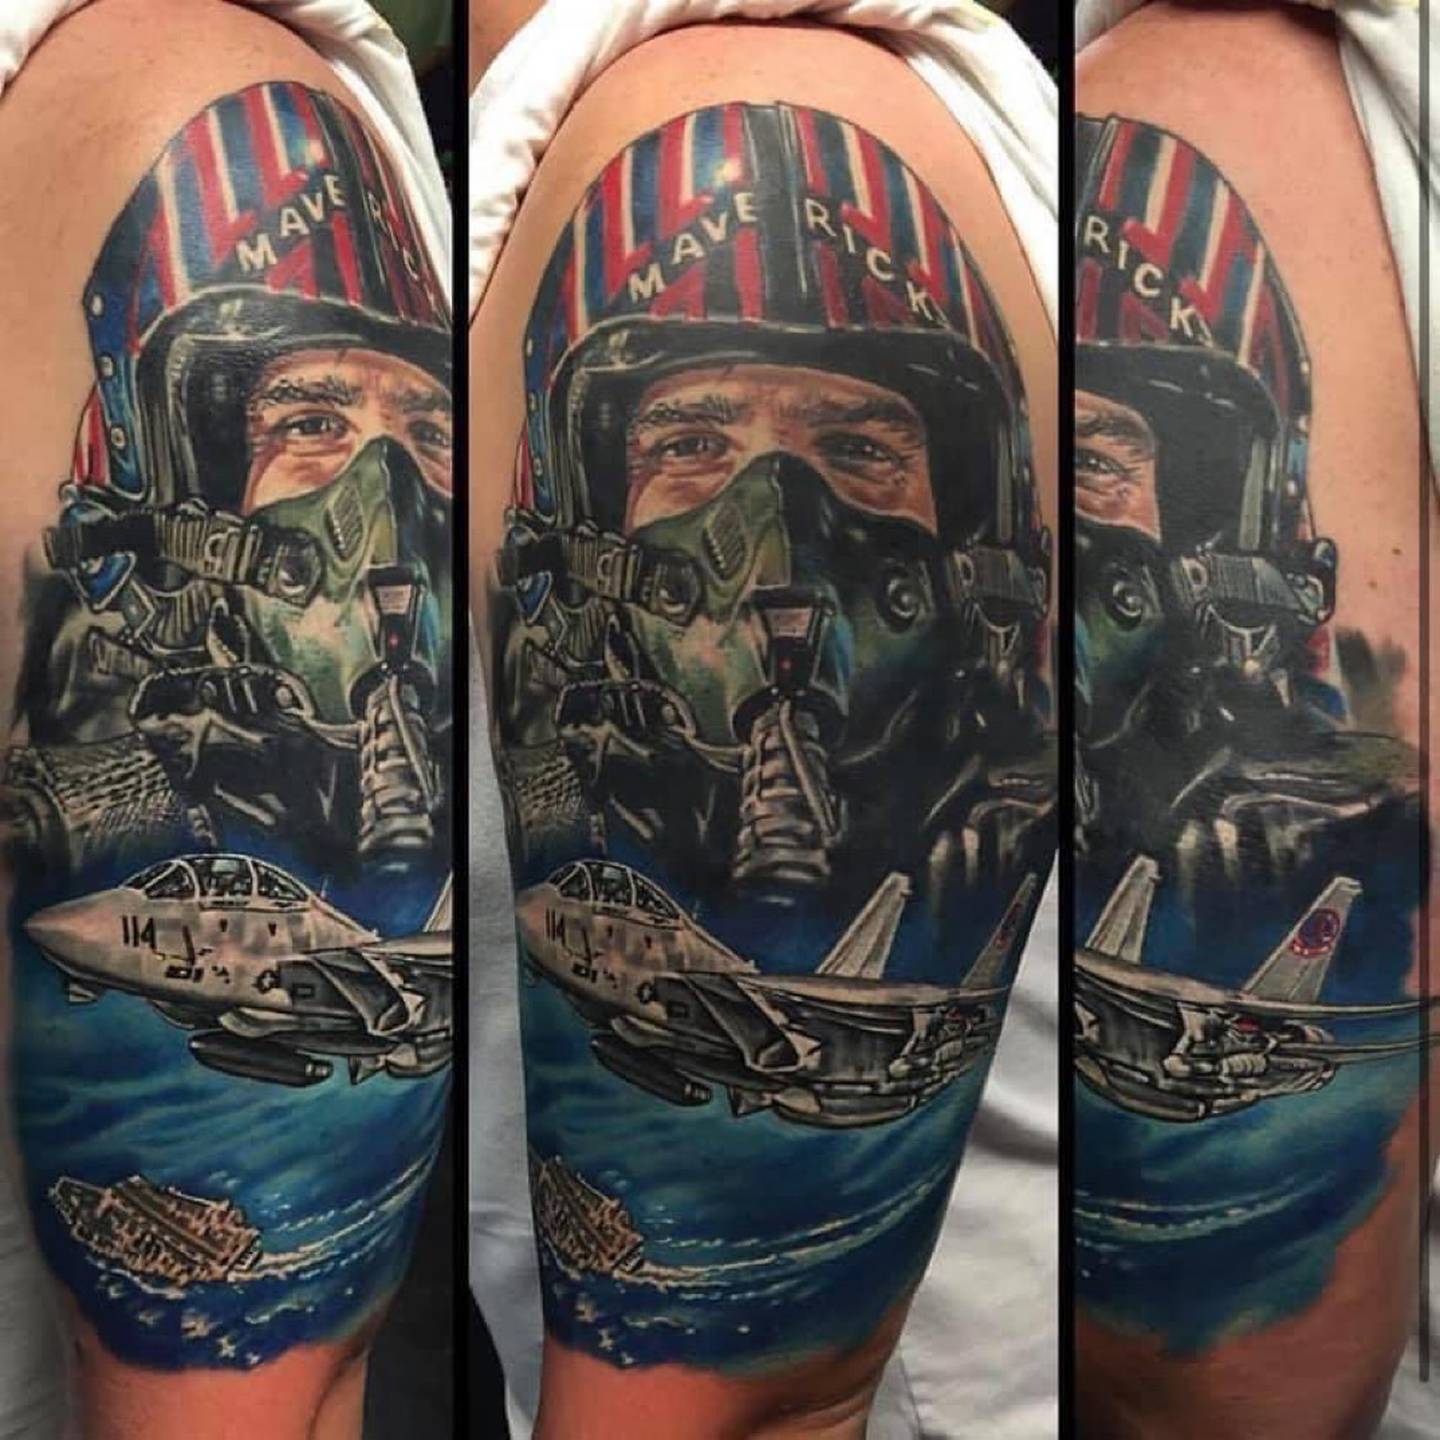 This 'Top Gun' tattoo will take your breath away